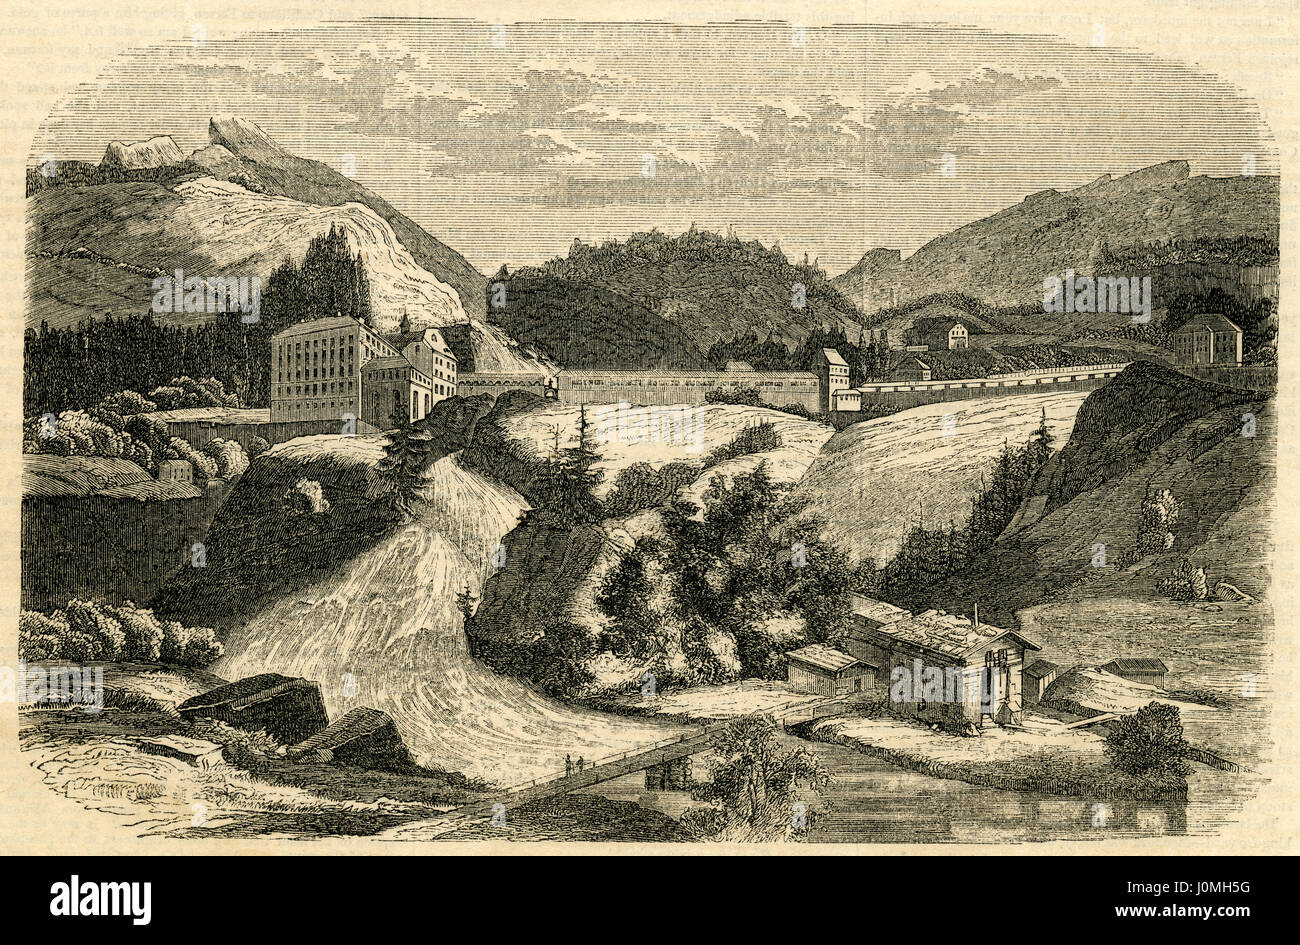 Antique 1854 engraving, 'Mineral Baths at Gastein in Germany.' Bad Gastein (formerly Badgastein) is a spa town in the district of St. Johann im Pongau, in the Austrian state of Salzburg. Picturesquely situated in a high valley of the Hohe Tauern mountain range, it is known for the Gastein Waterfall and a variety of Belle ƒpoque hotel buildings. SOURCE: ORIGINAL ENGRAVING. Stock Photo